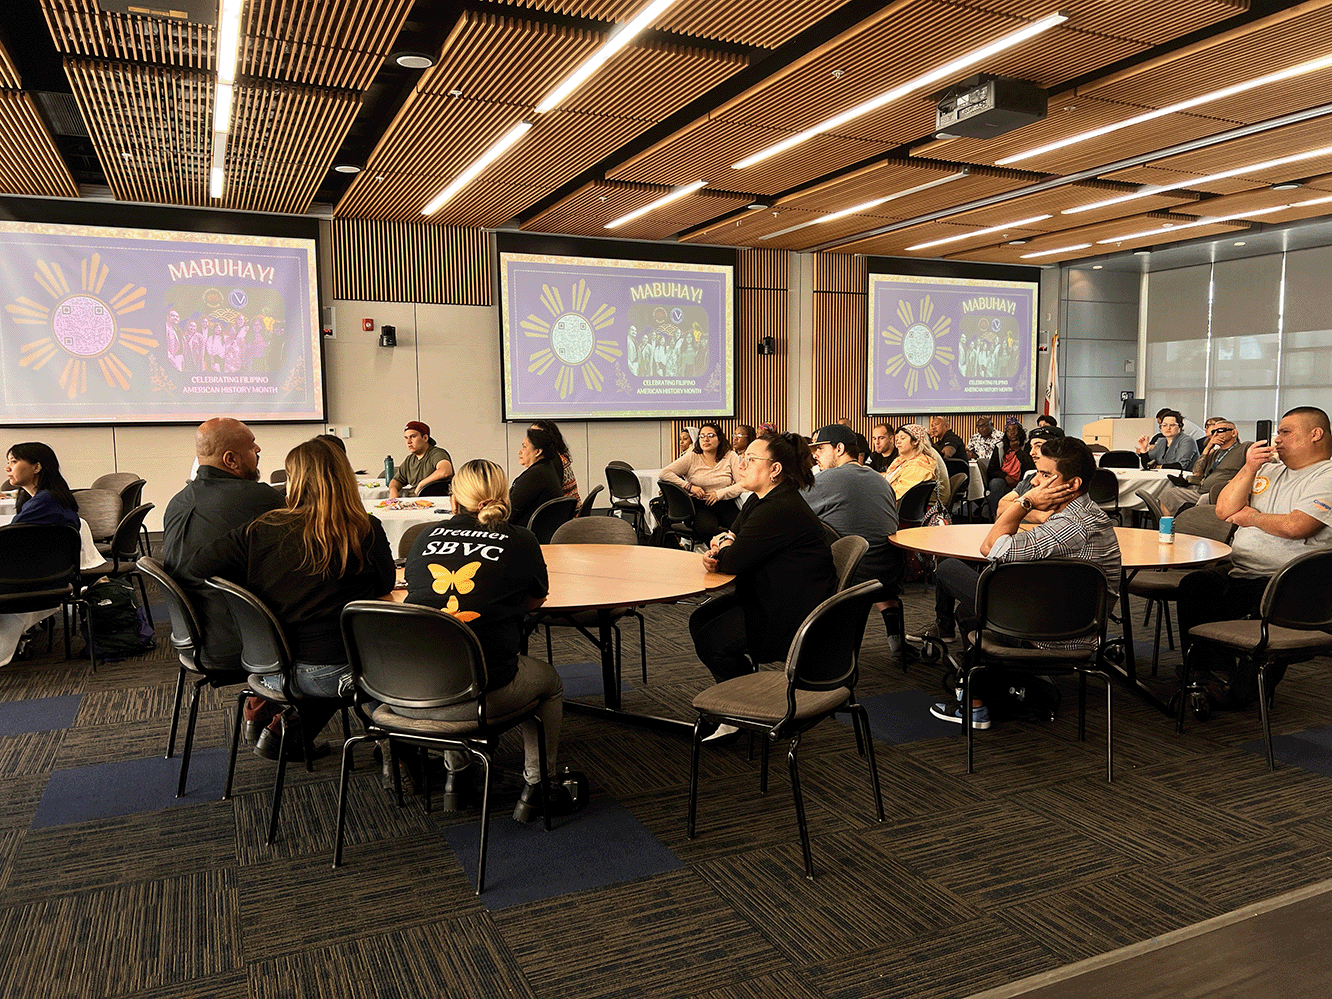 The image shows multiple groups of people sitting round round tables in a large room with multiple screens. The screens show the presentation for the event